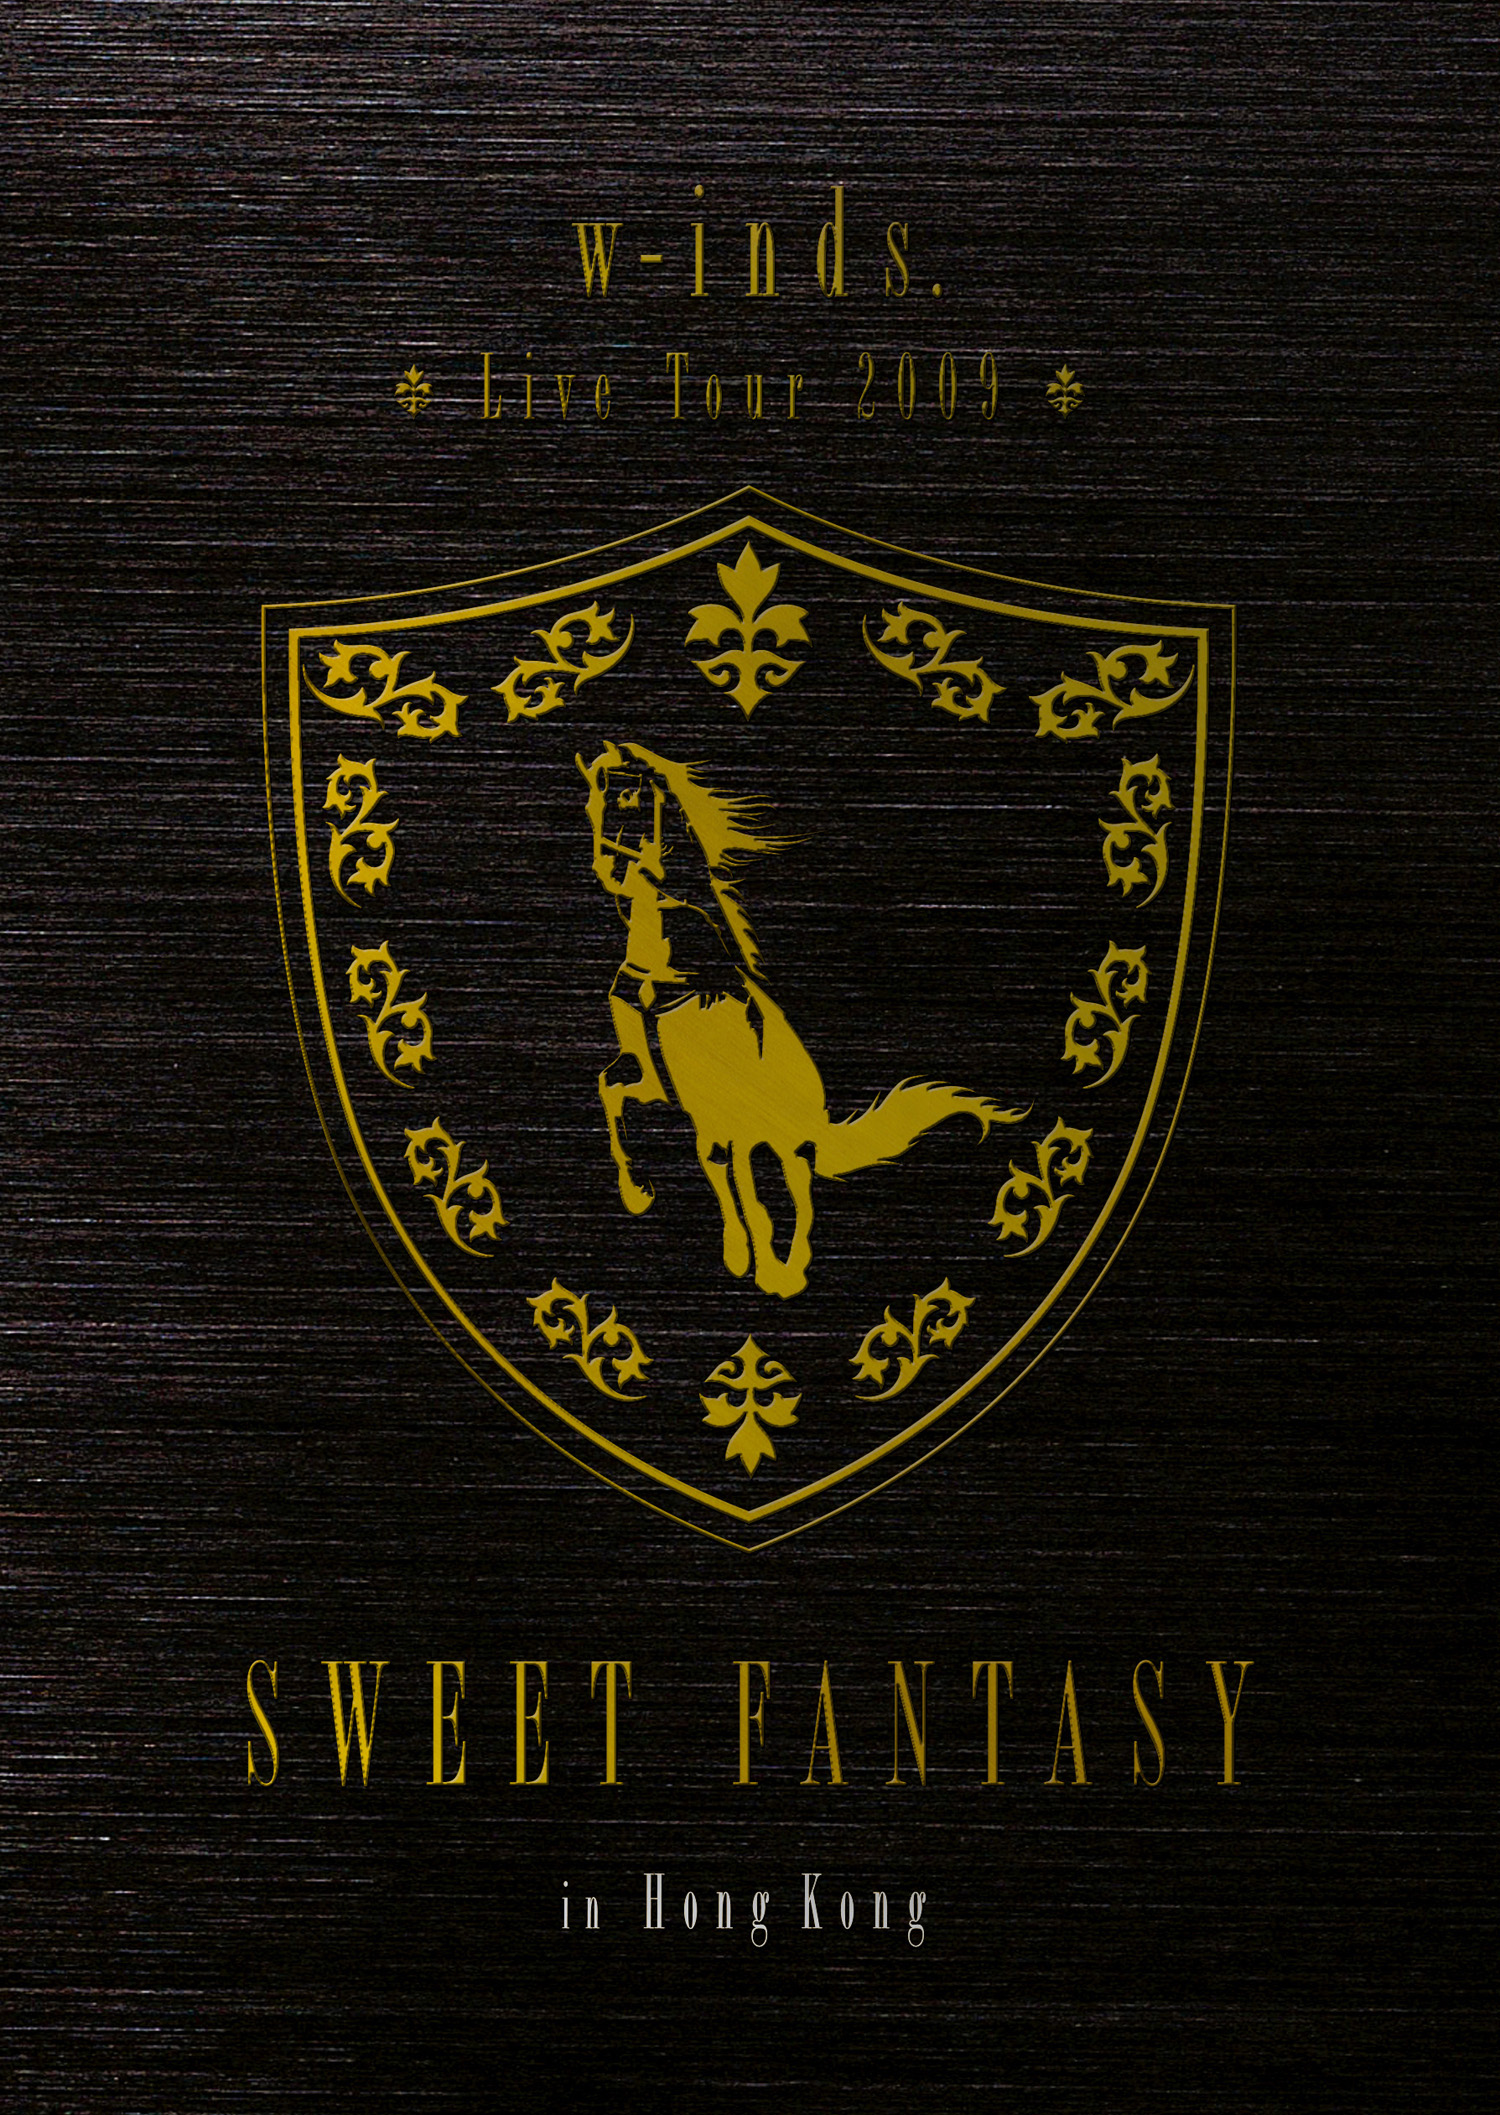 w-inds. Live Tour 2009 "SWEET FANTASY" in Hong Kong